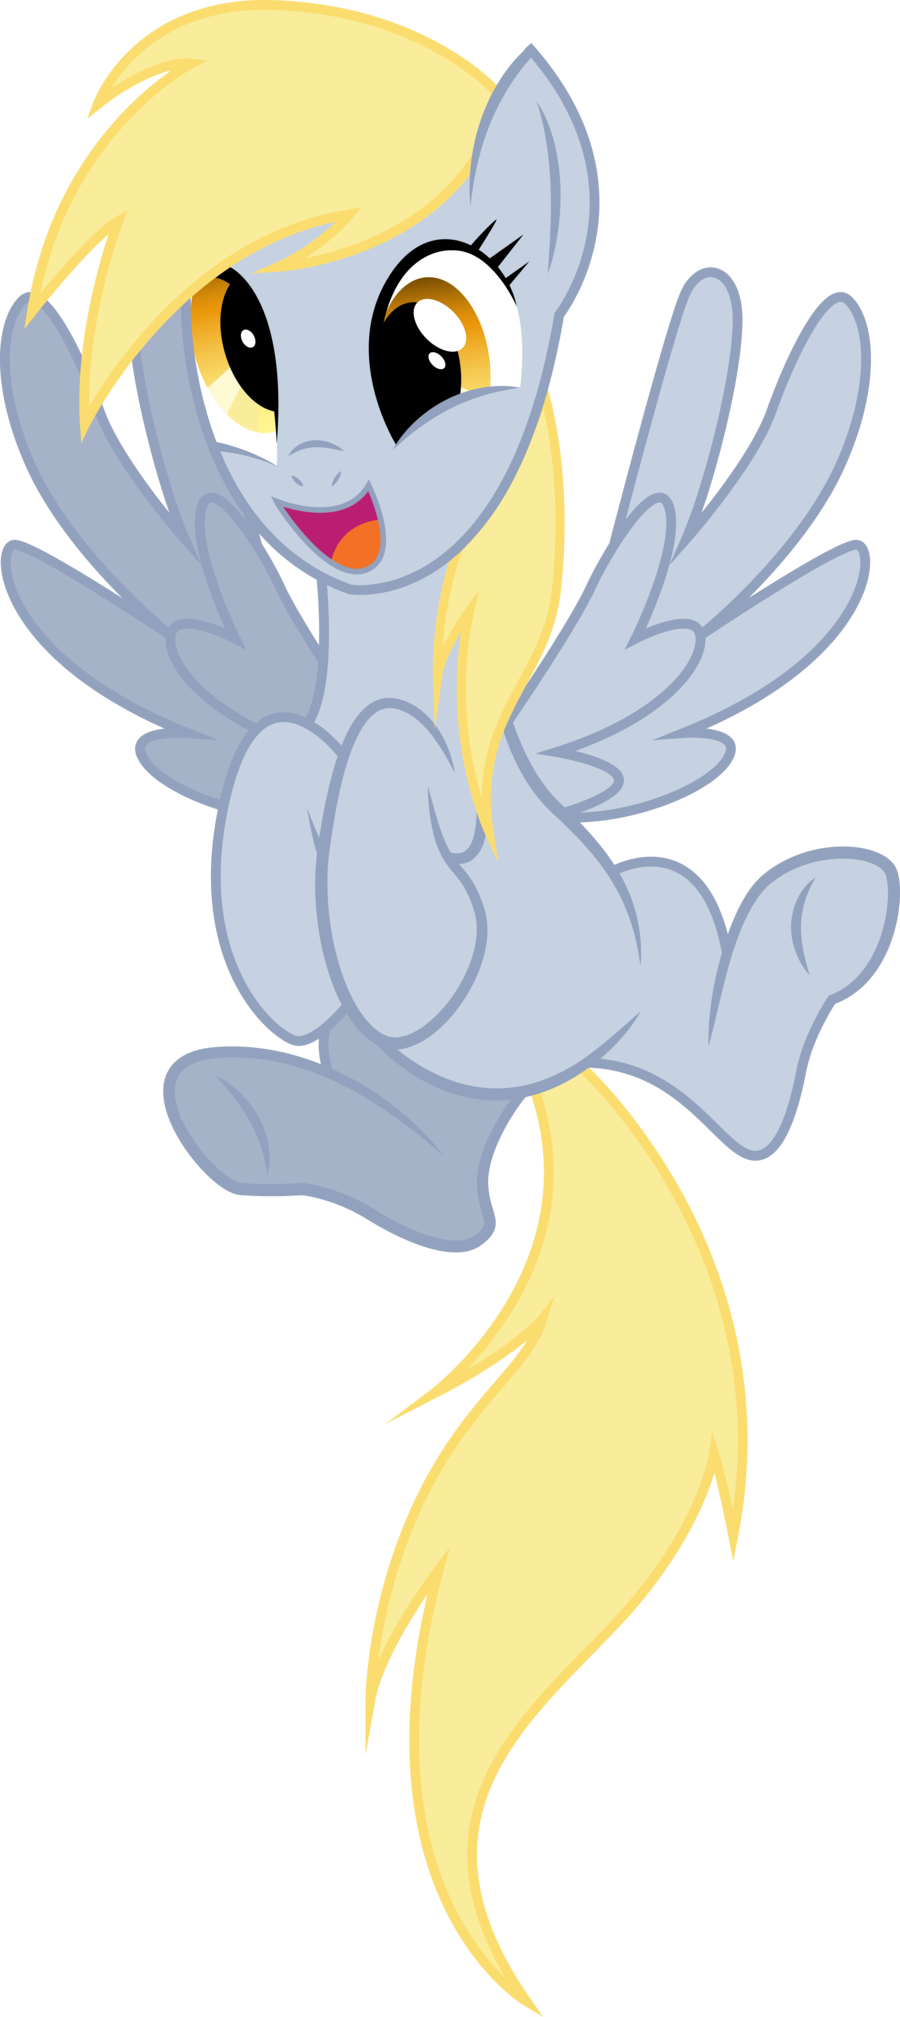 a_happy_derpy_by_sparkponies-d4yspbb.png